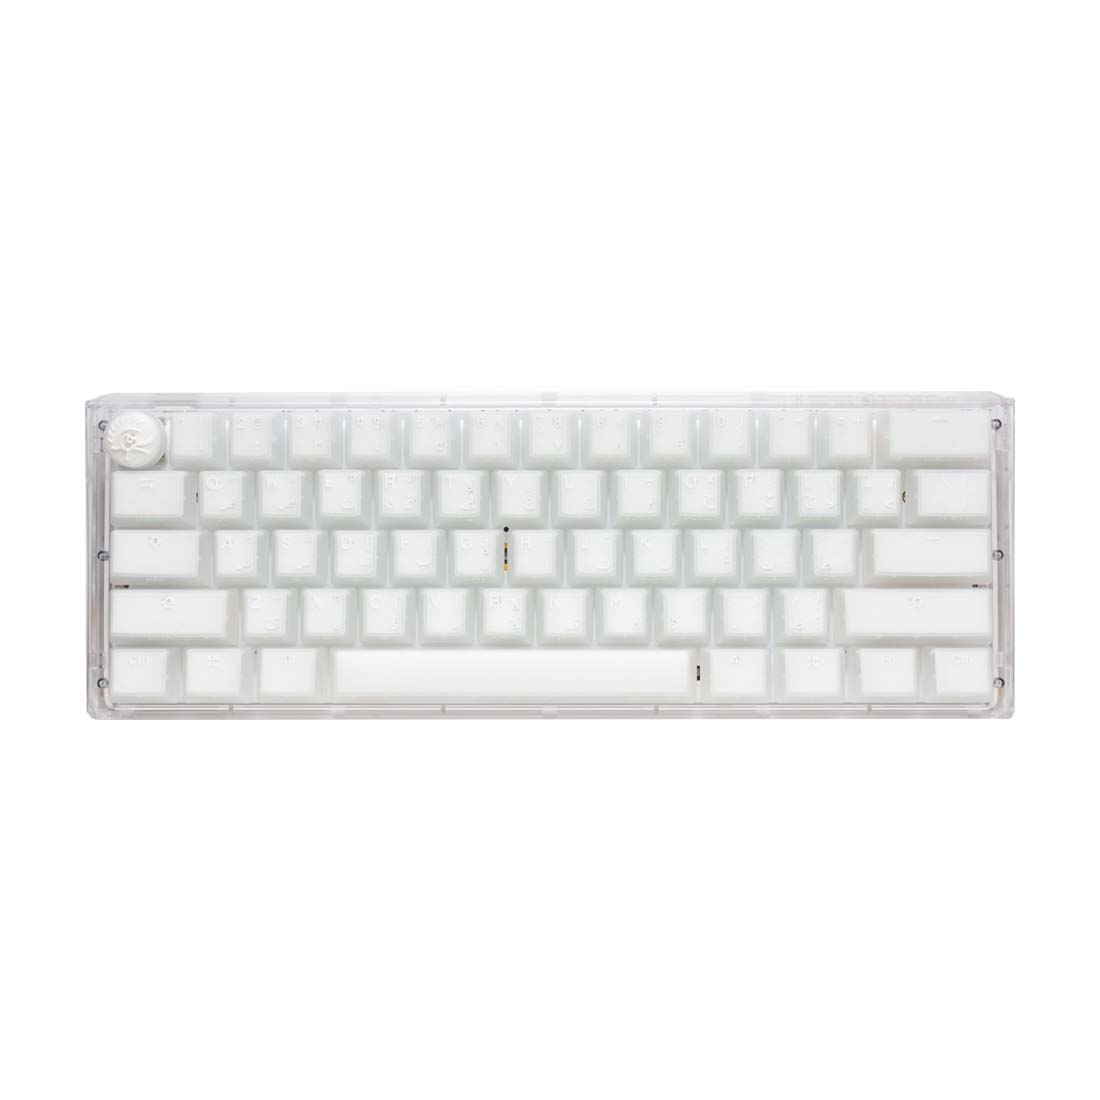 Ducky One 3 Mini Aura 60% Wired Mechanical Gaming Keyboard - Silent Red Switch - White - لوحة مفاتيح - Store 974 | ستور ٩٧٤